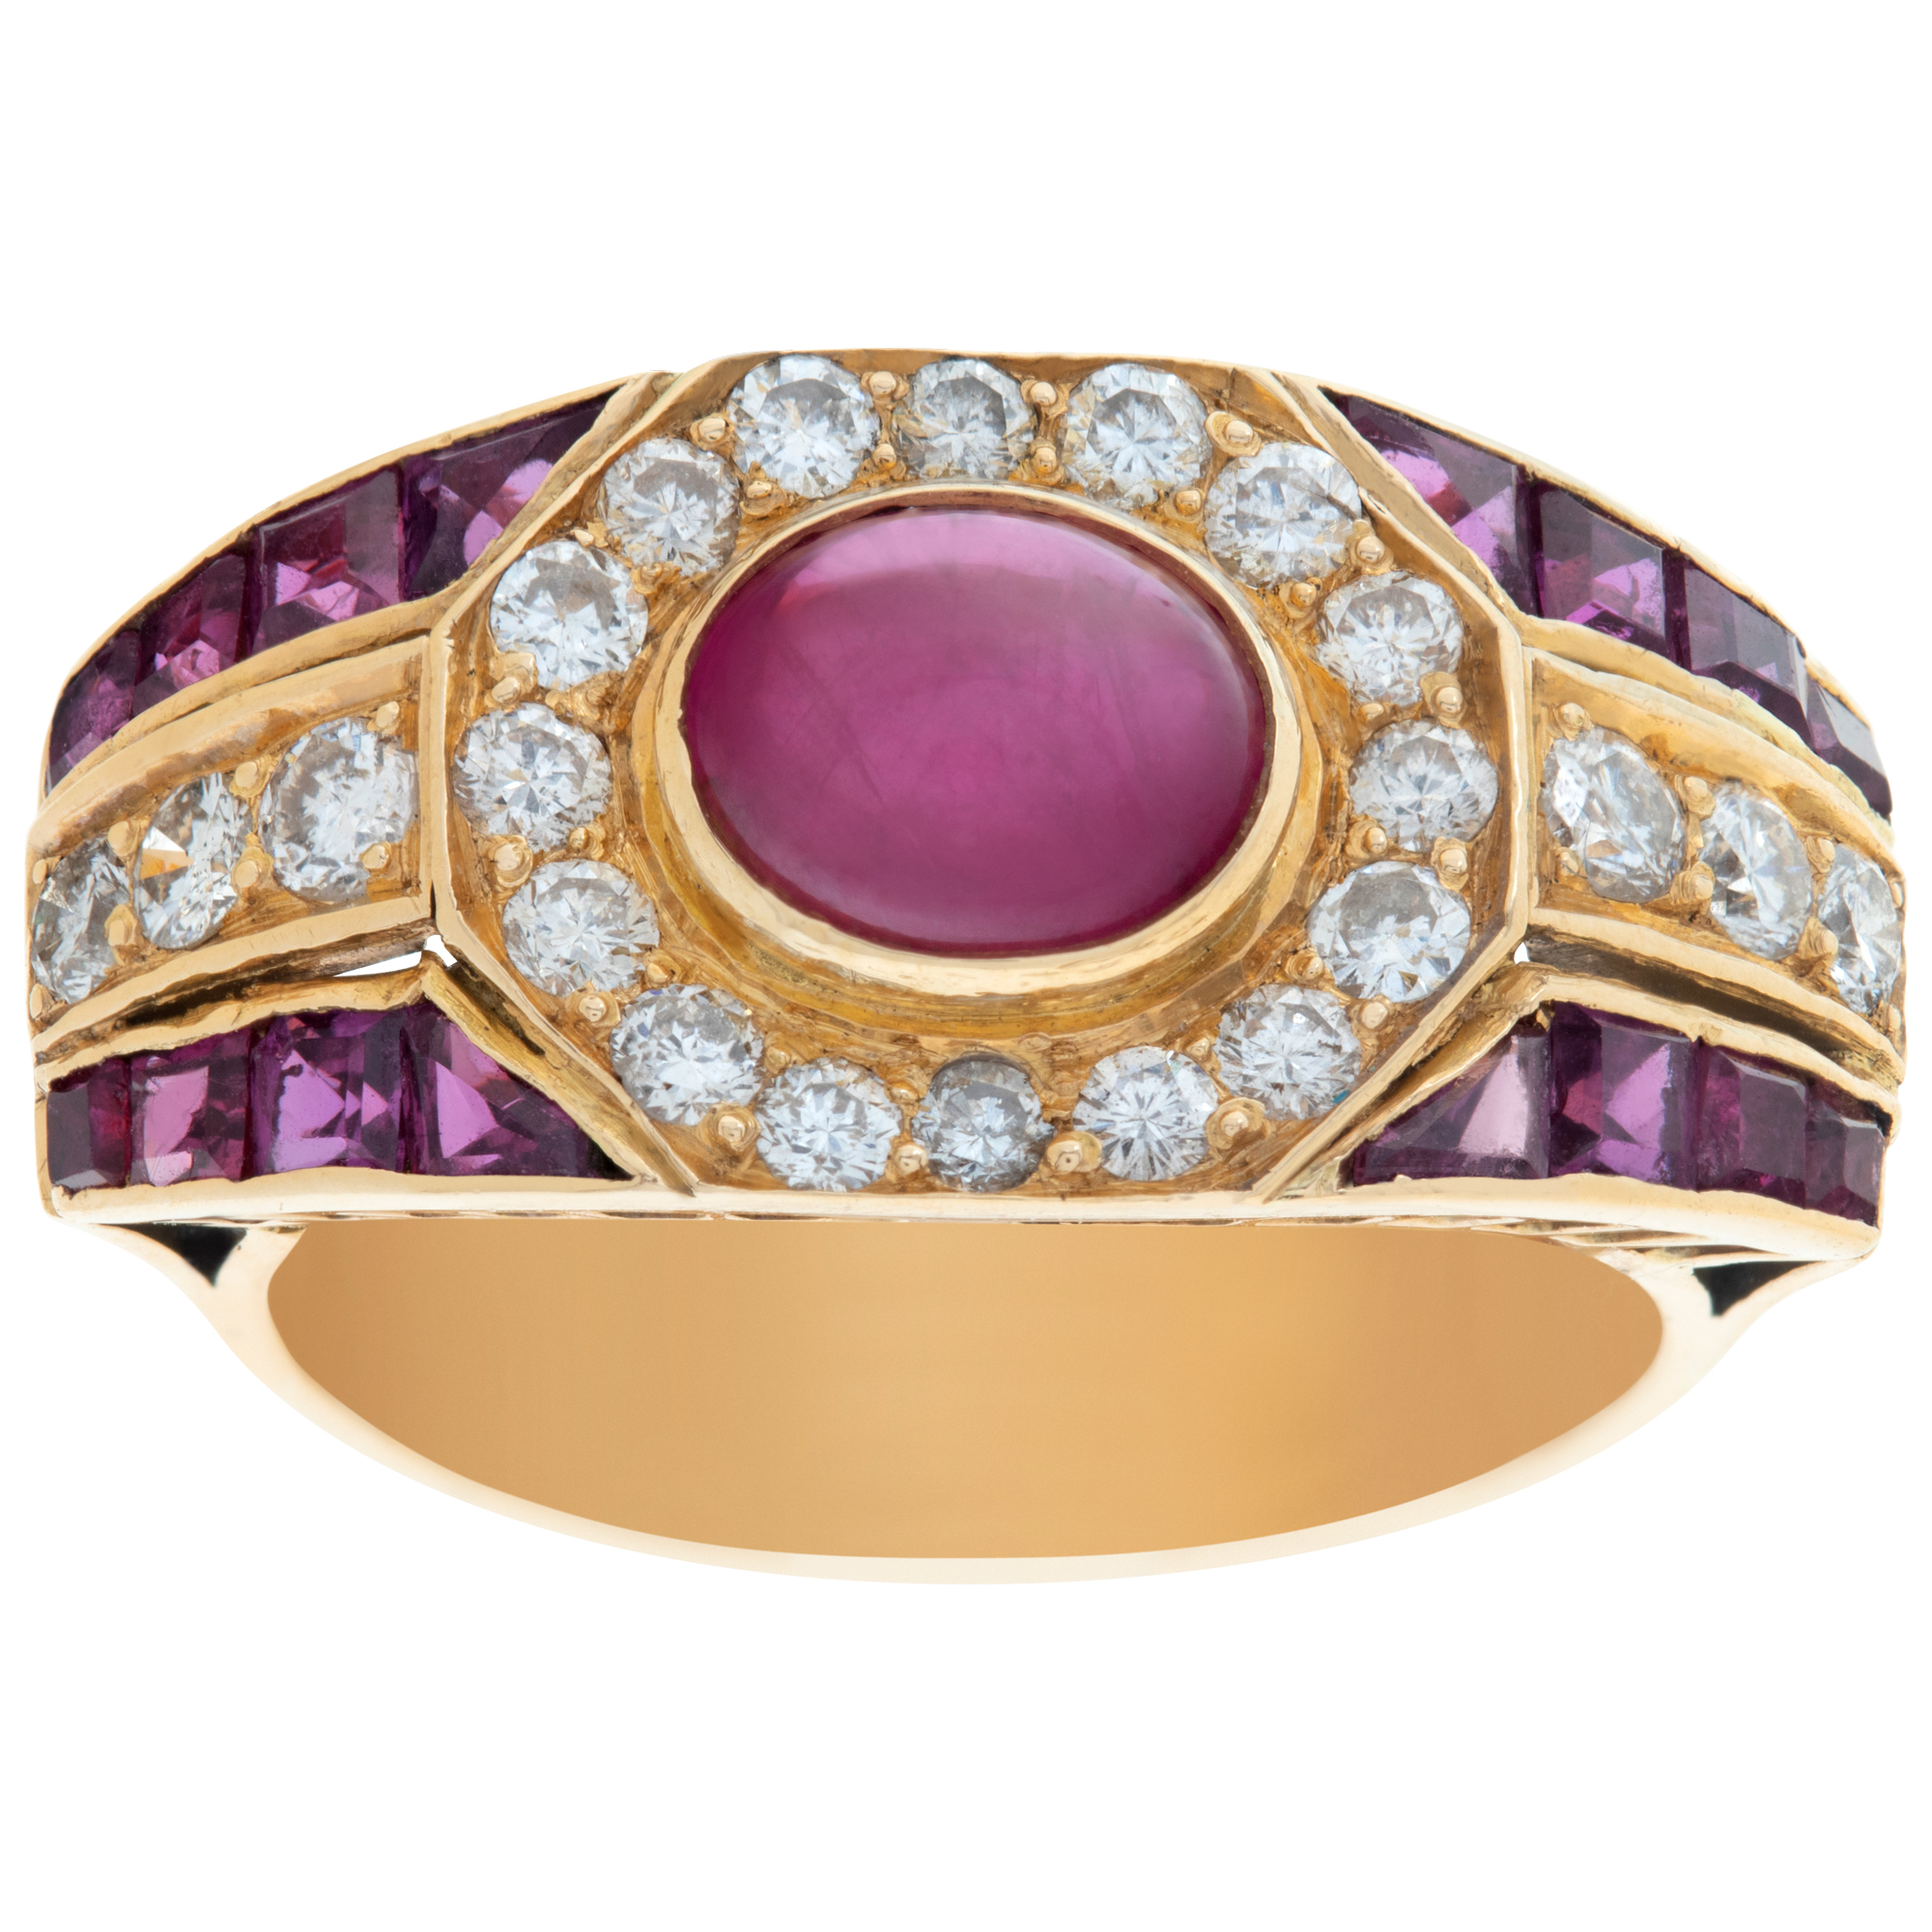 Cabochon ruby and diamond ring in 18k yellow gold. 0.50 carats in diamonds image 1